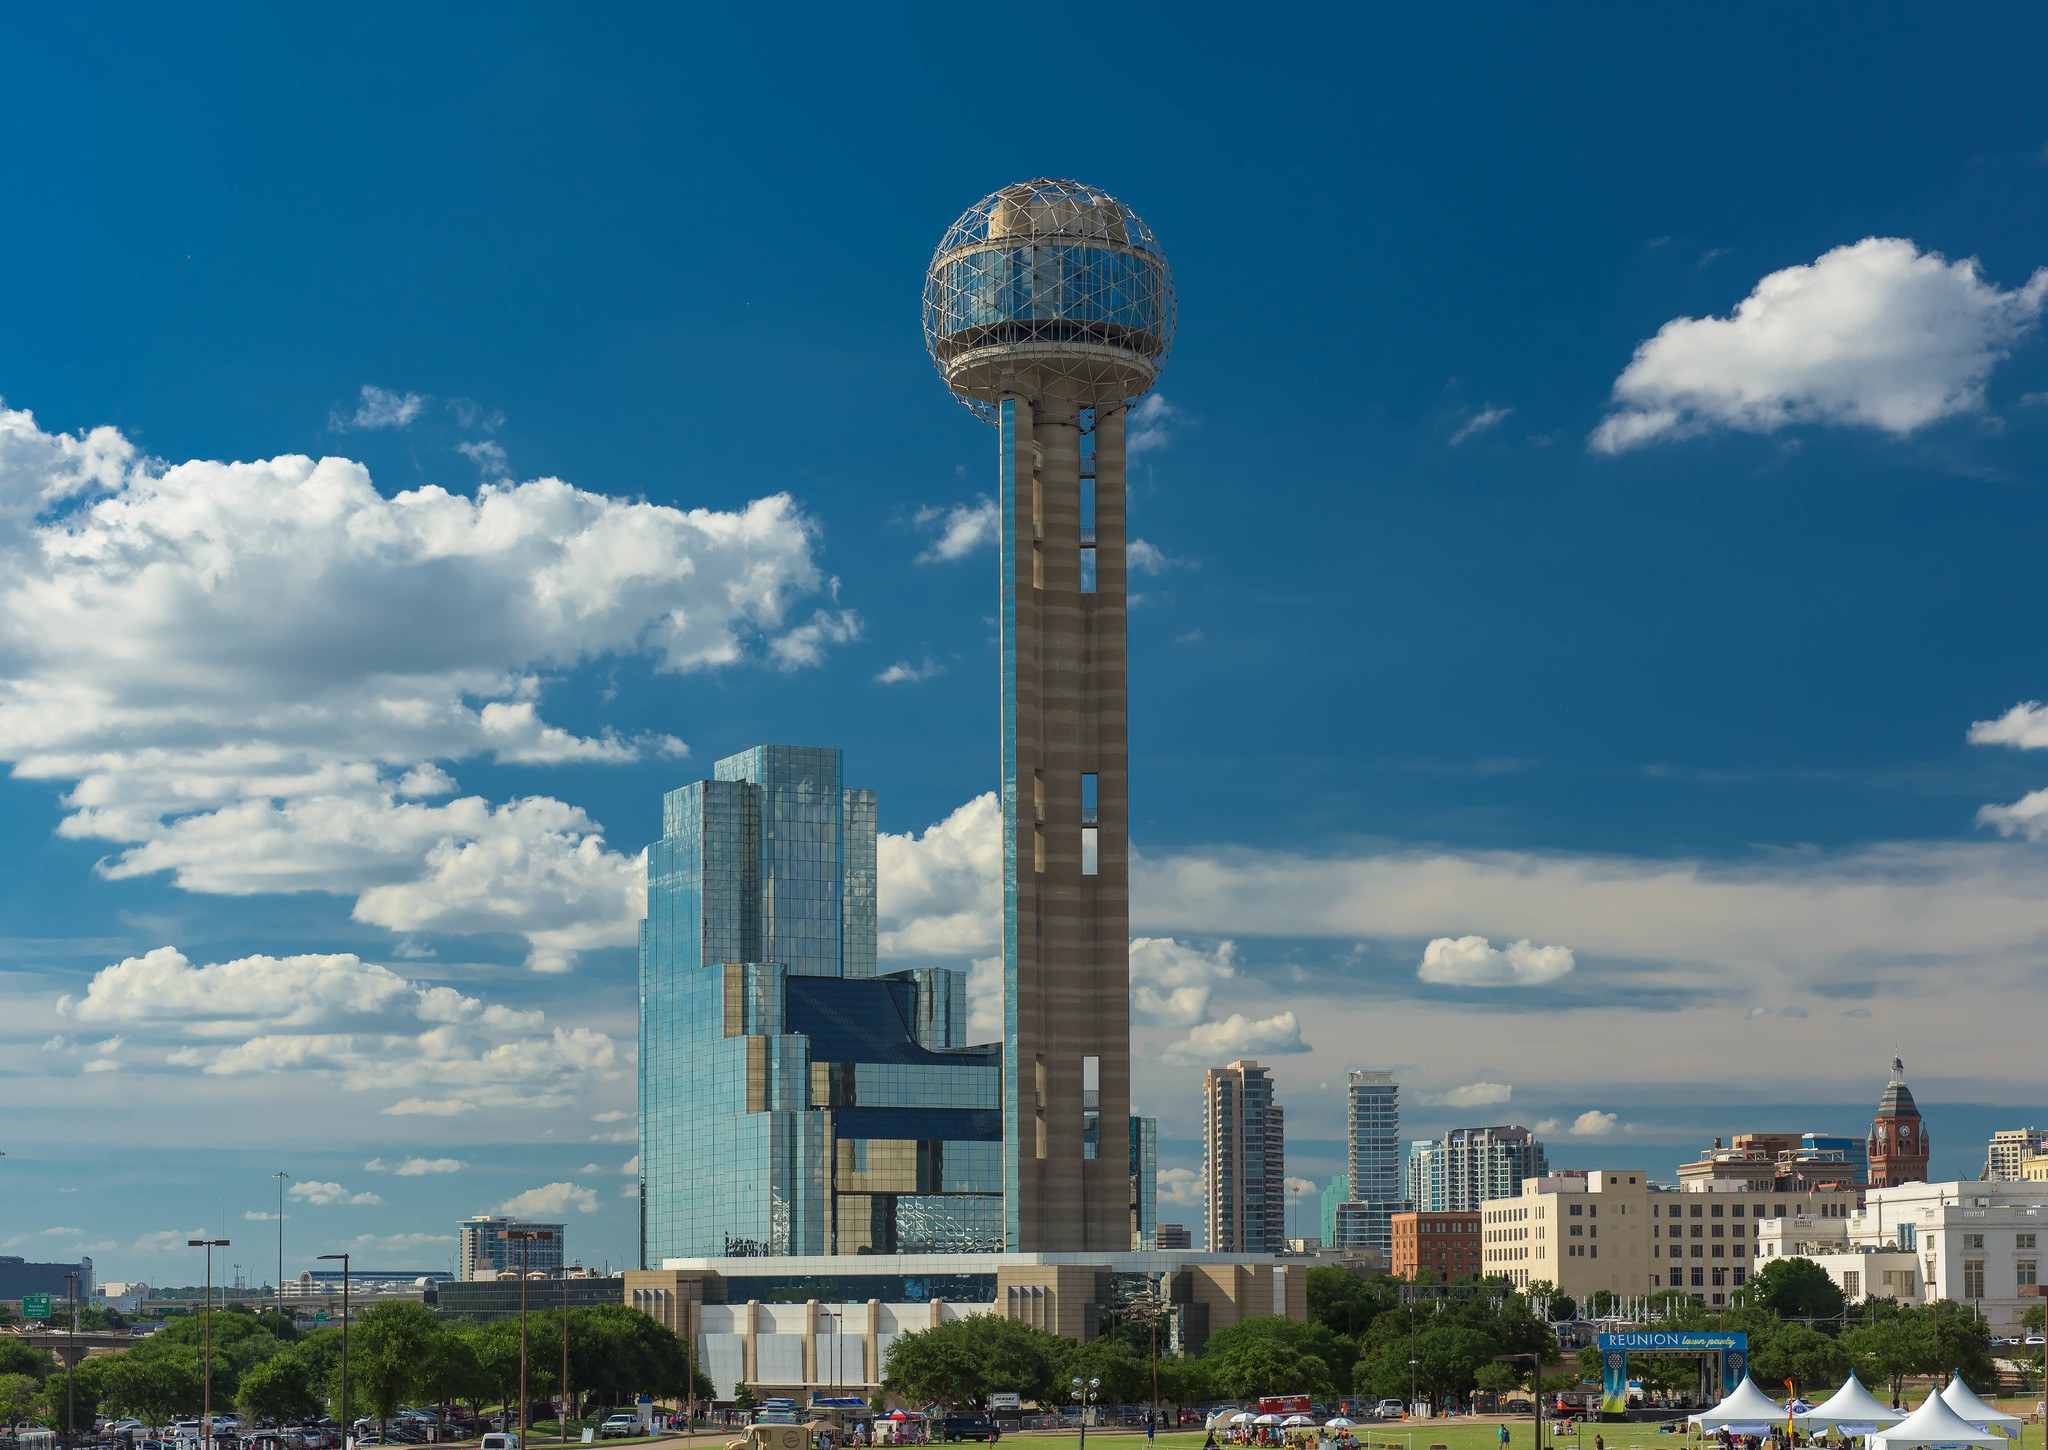 Things to do in Dallas, Texas